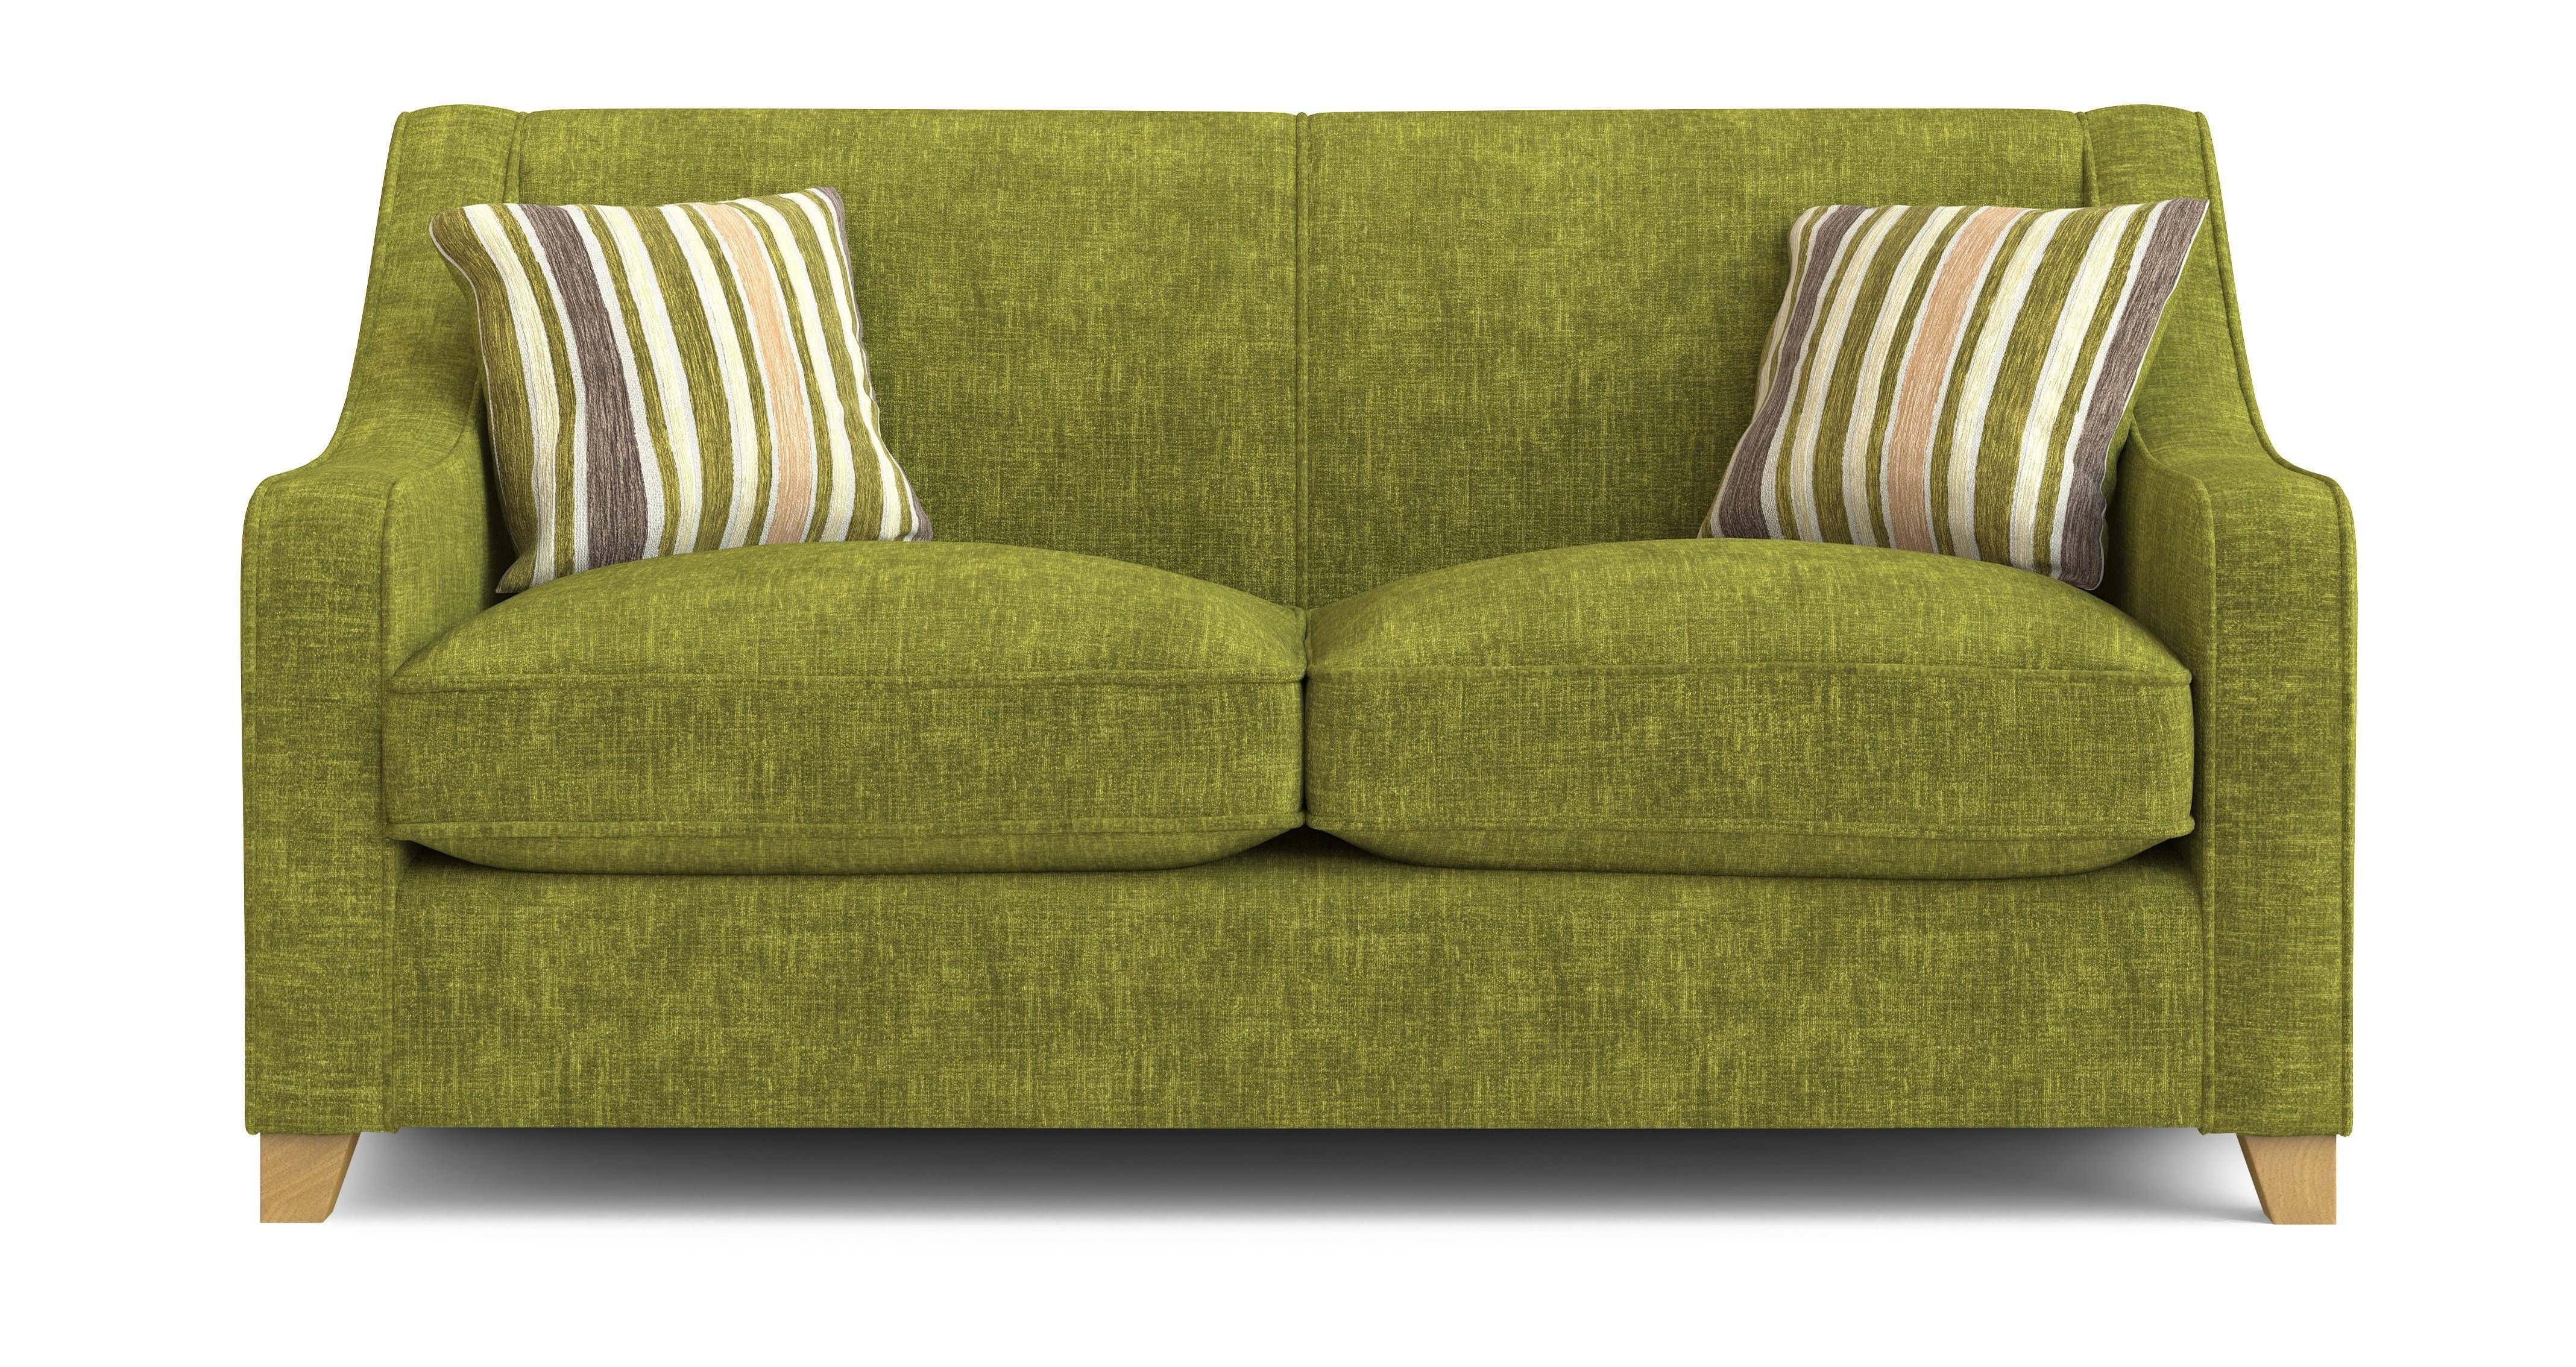 Small 2 Seater Sofa Best Sofas Ideas Sofascouch Pertaining To Small 2 Seater Sofas 